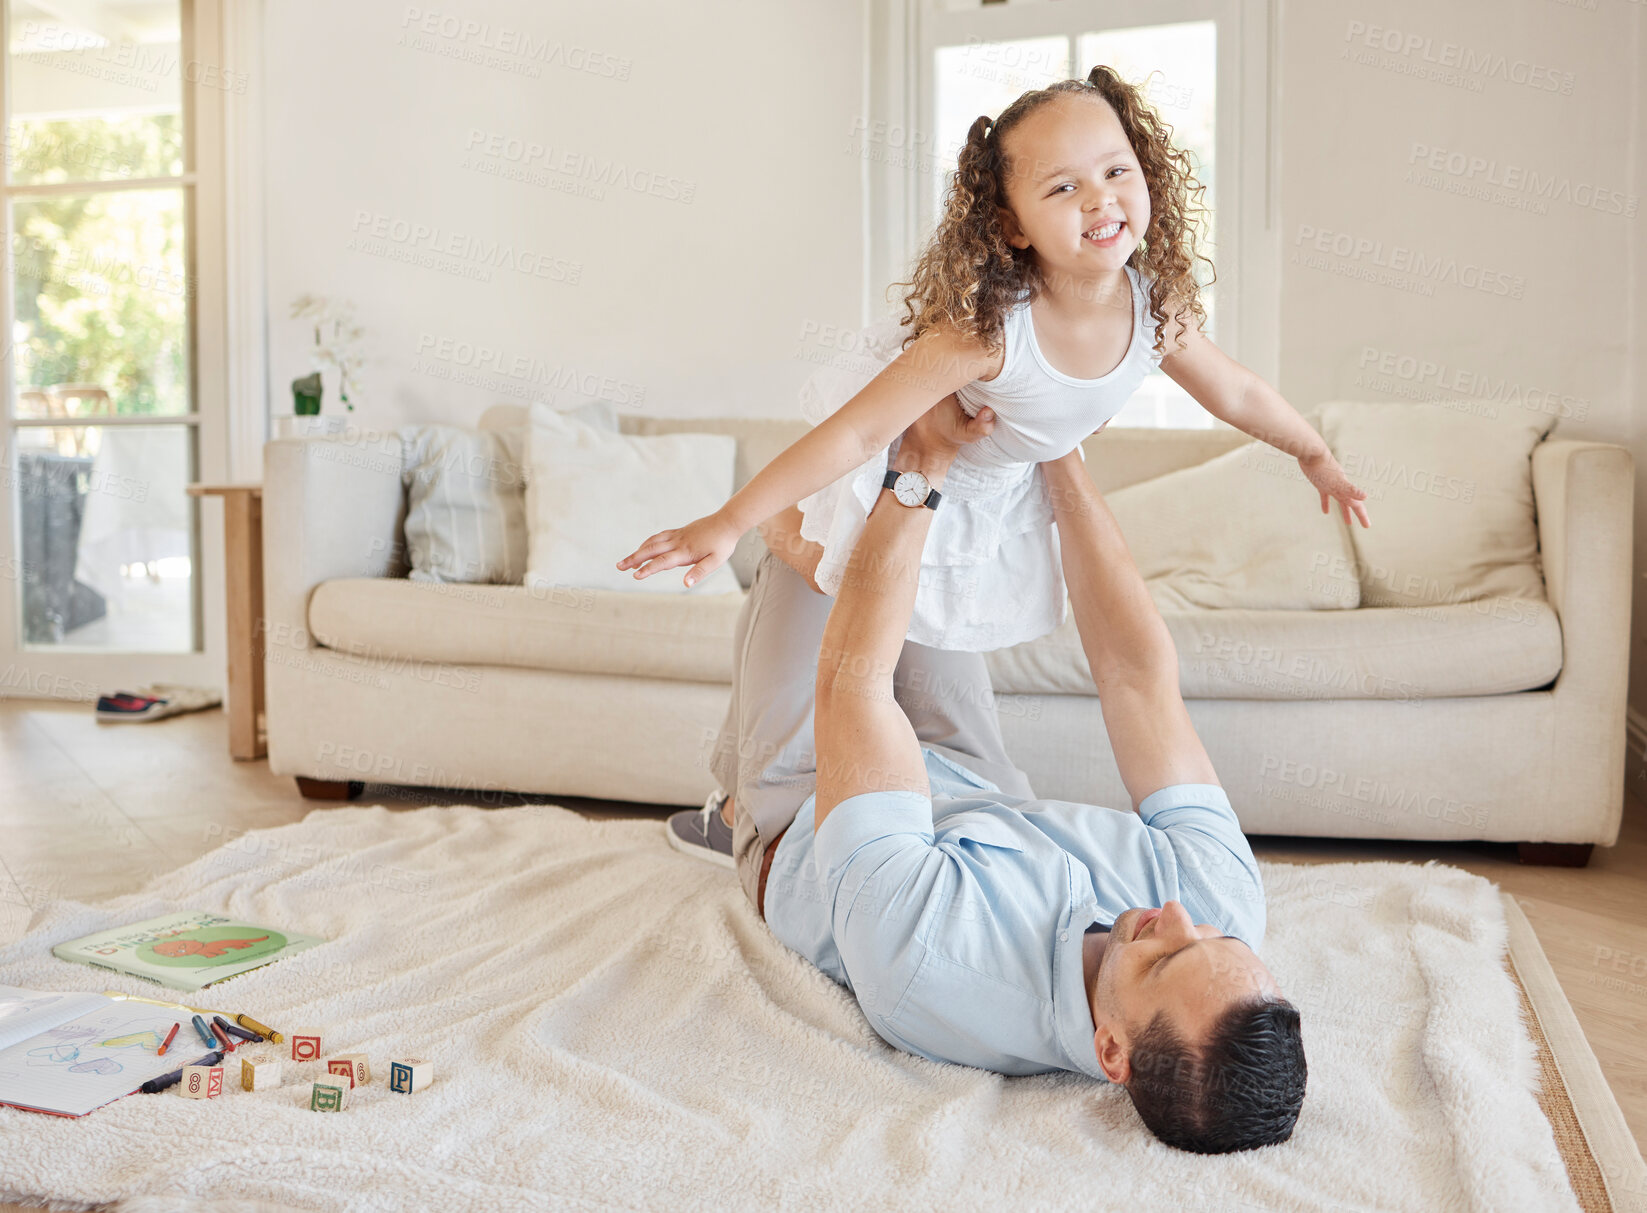 Buy stock photo Shot of a man bonding with his adorable daughter at home